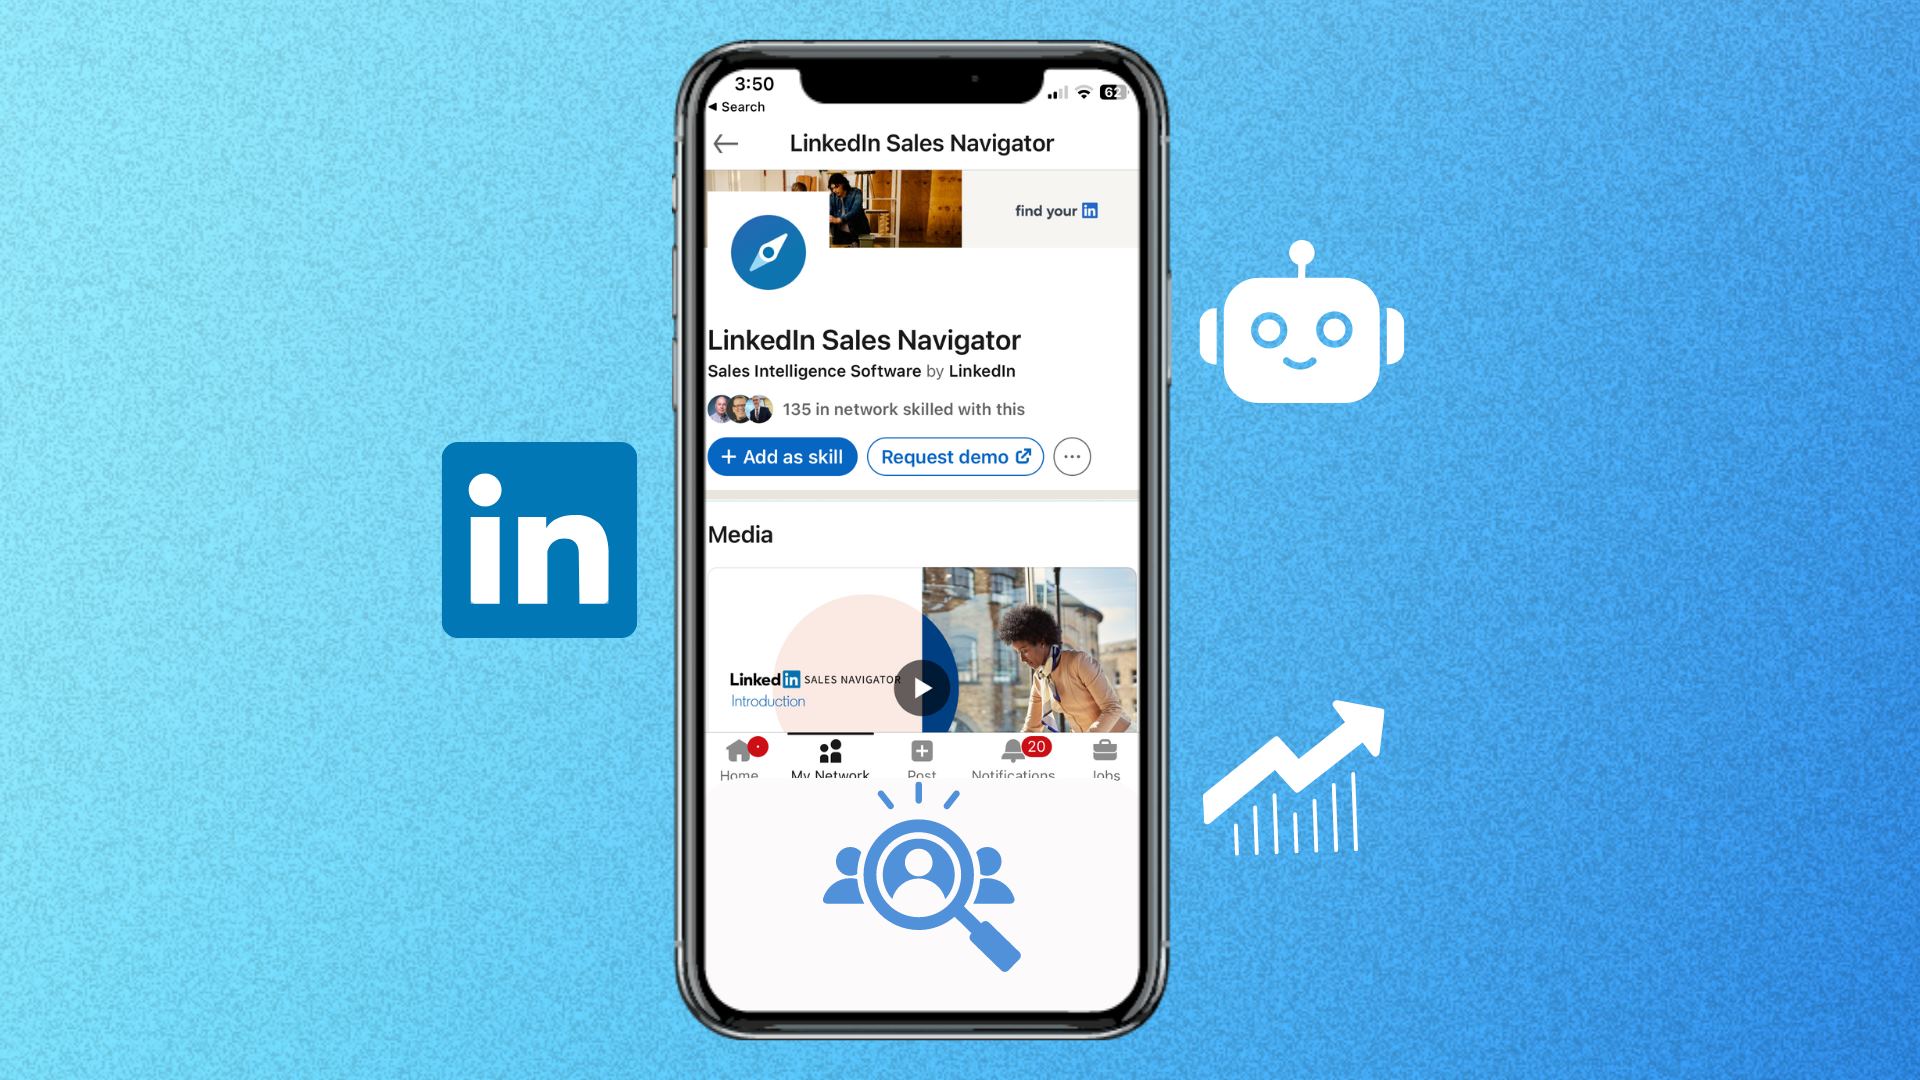 LinkedIn Introduces New AI Tools For Learning, Recruitment, Marketing, And Sales